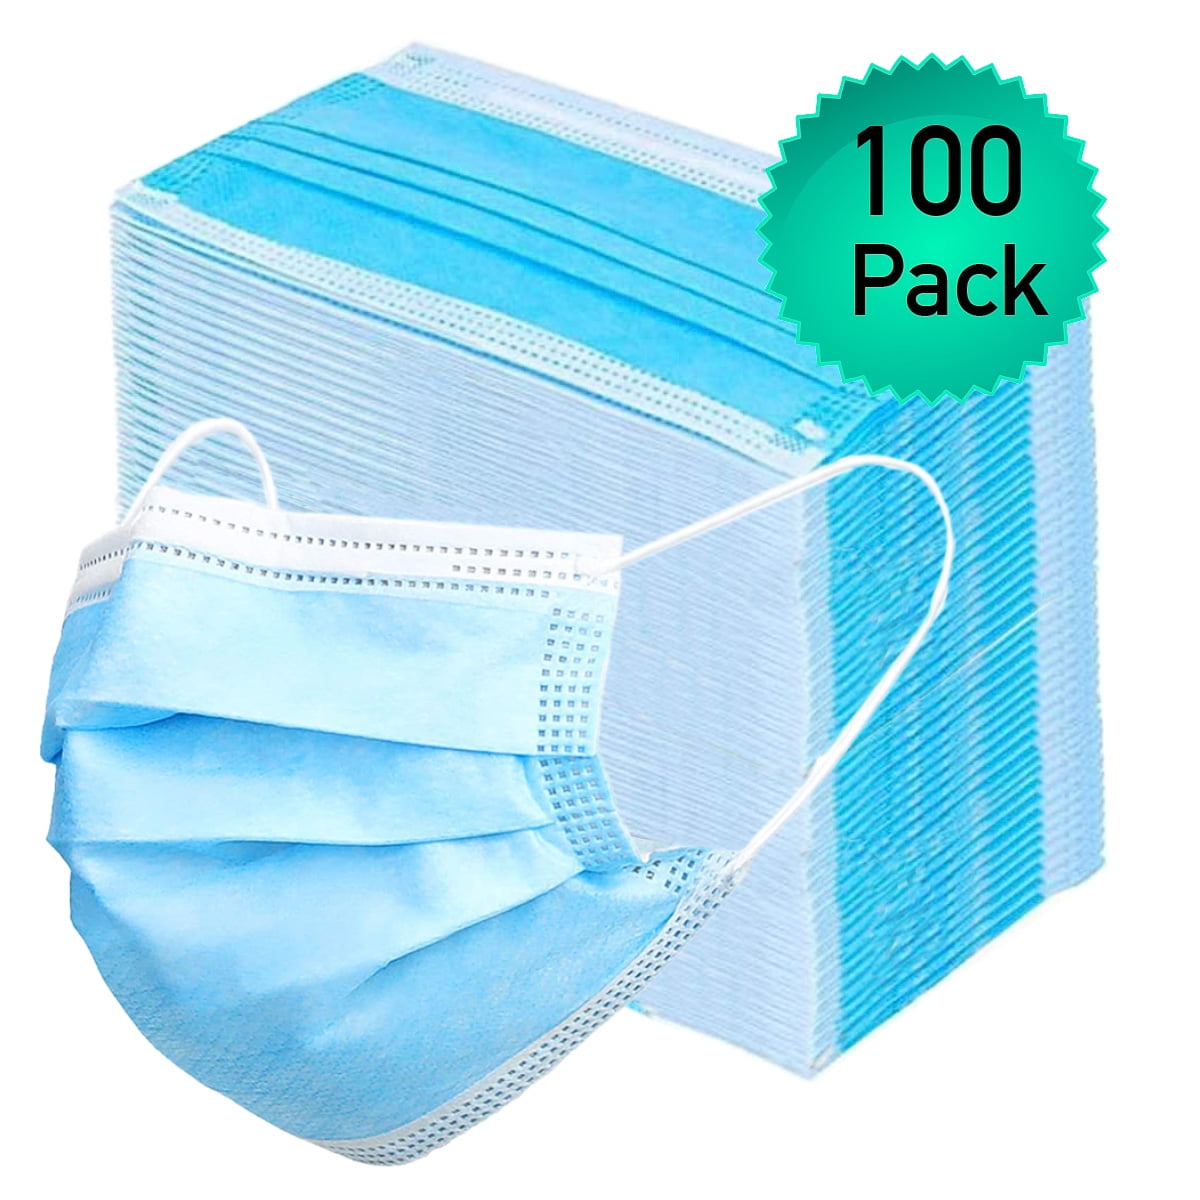 50 Pcs Disposable Face Protection 3-Ply Safety and Breathable Mouth Covers for Personal Health Air Pollution with Blue Colors 